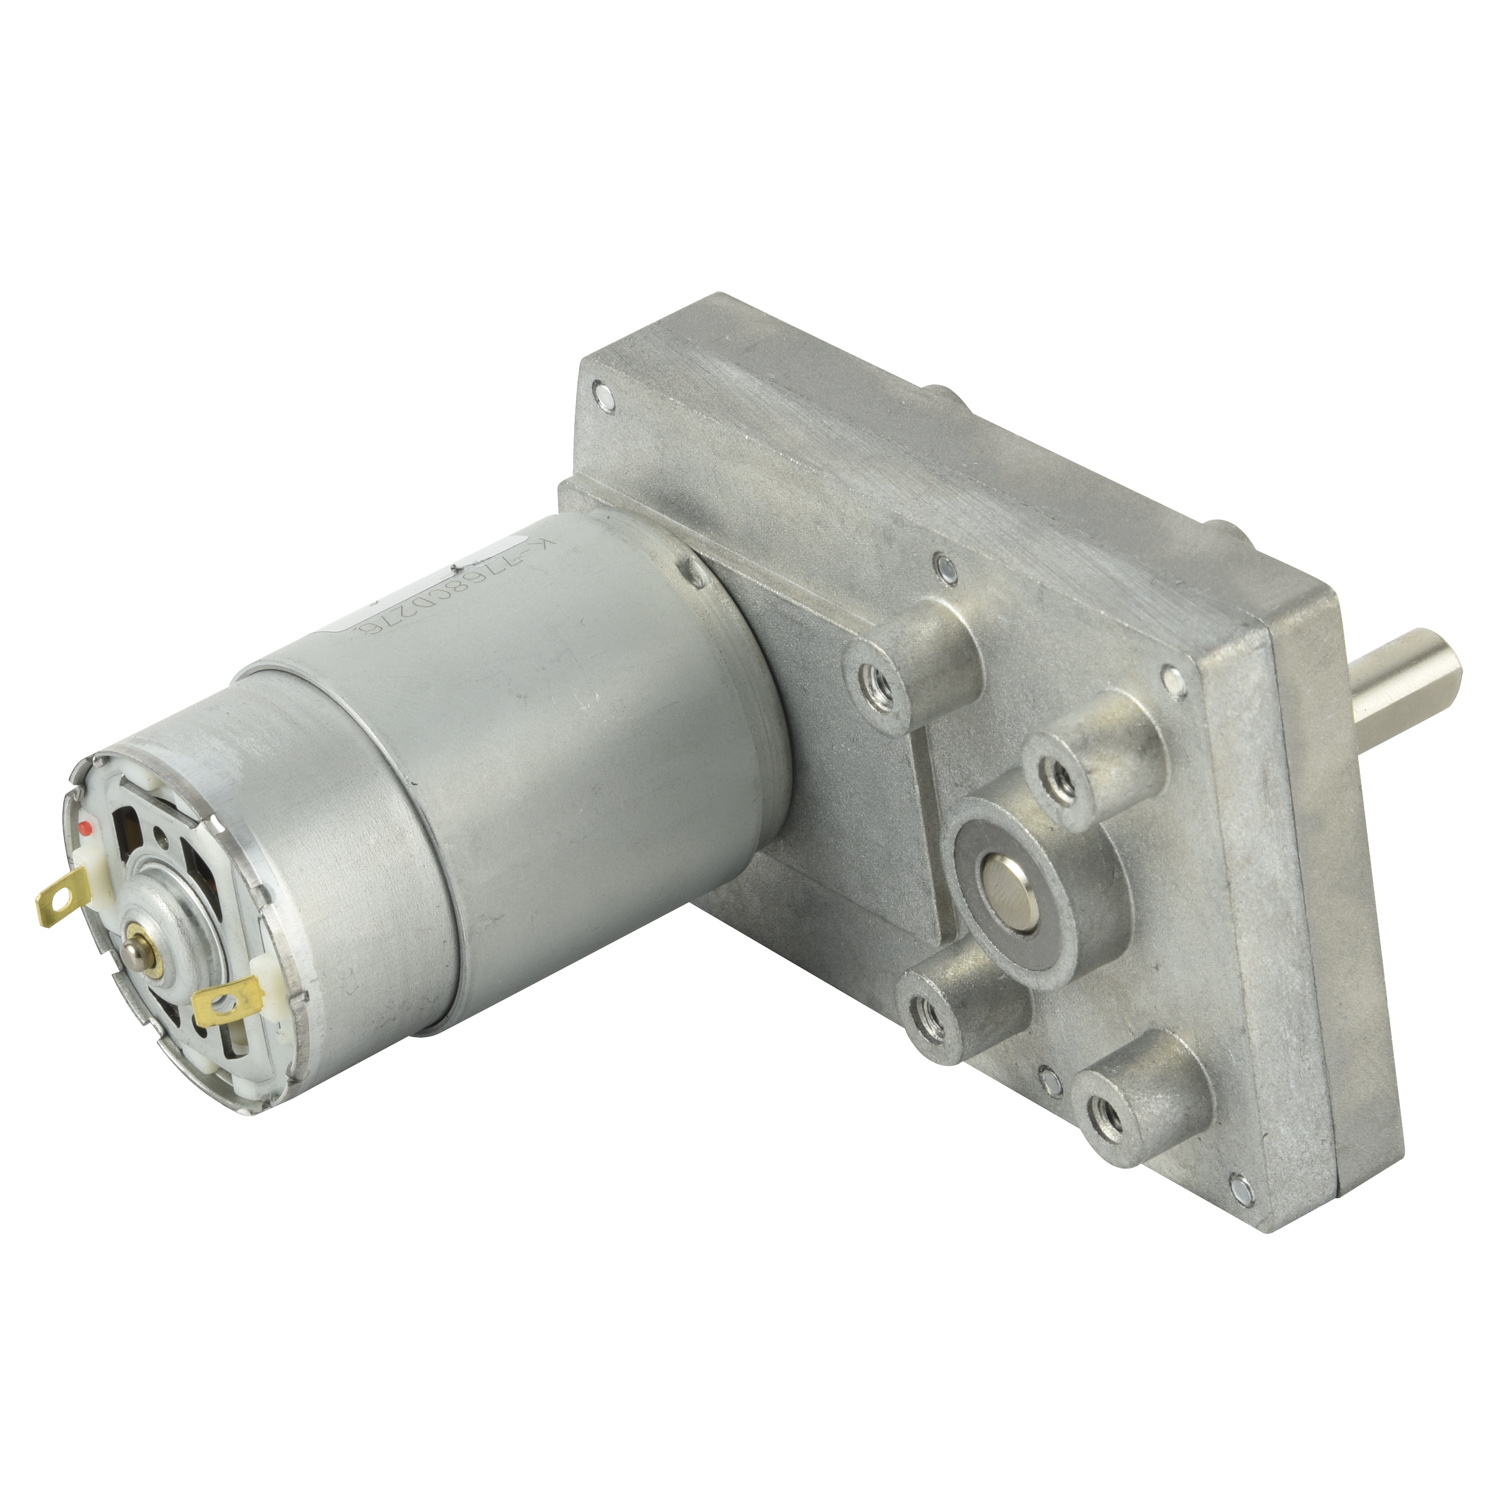 DC Parallel Gear Motor（RS775-PAG6095）